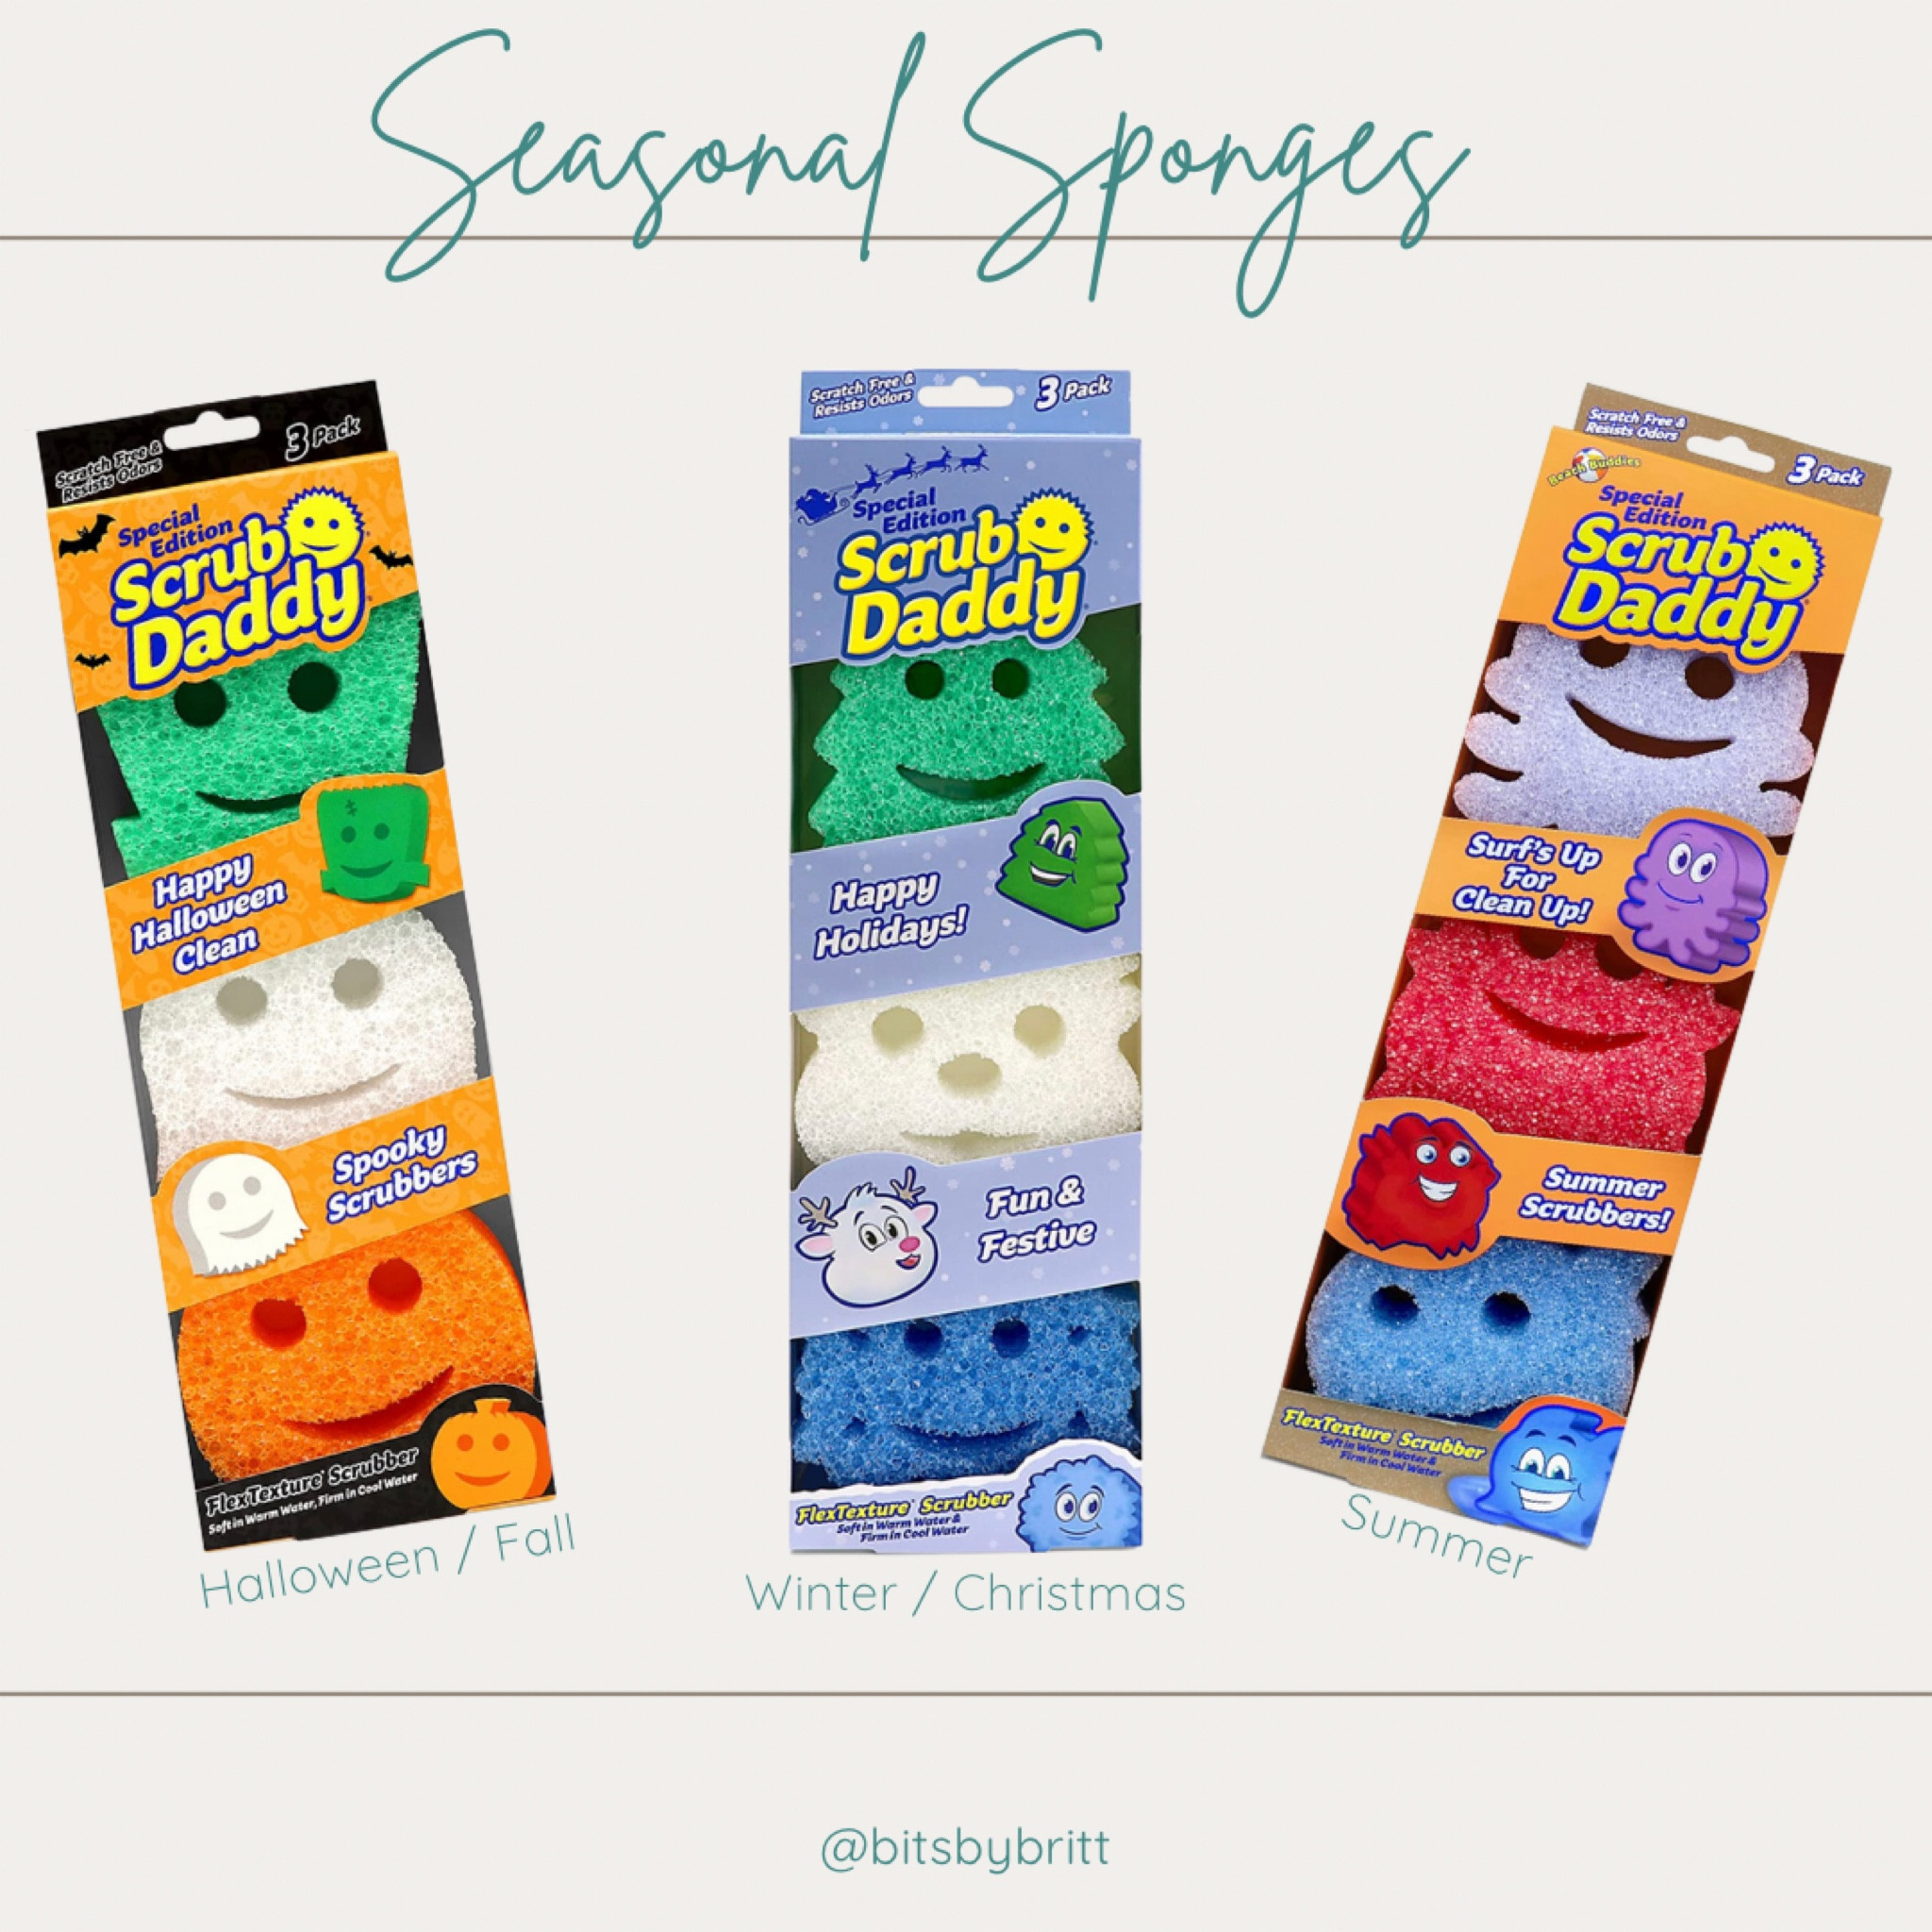 A fun and exciting crunchy slime featuring @scrubdaddy Special Edition  Winter Sponges